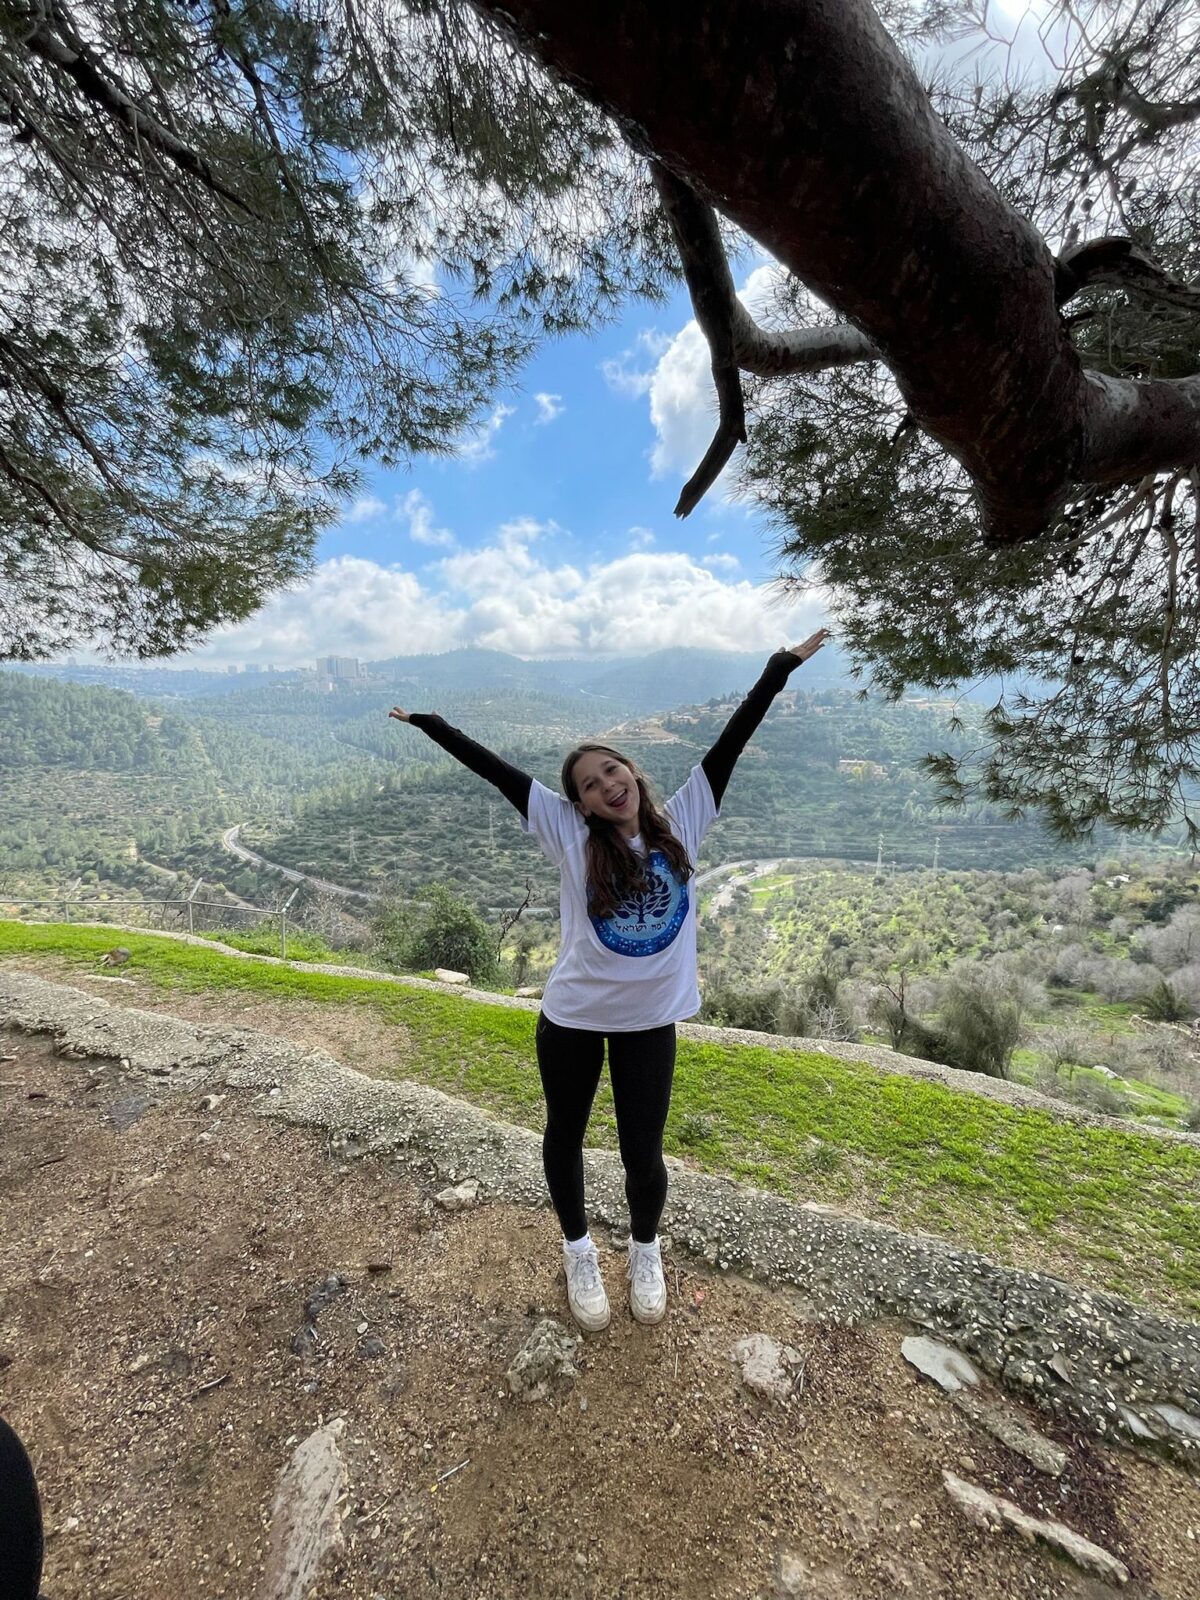 If Not Now: My Daughter in Israel